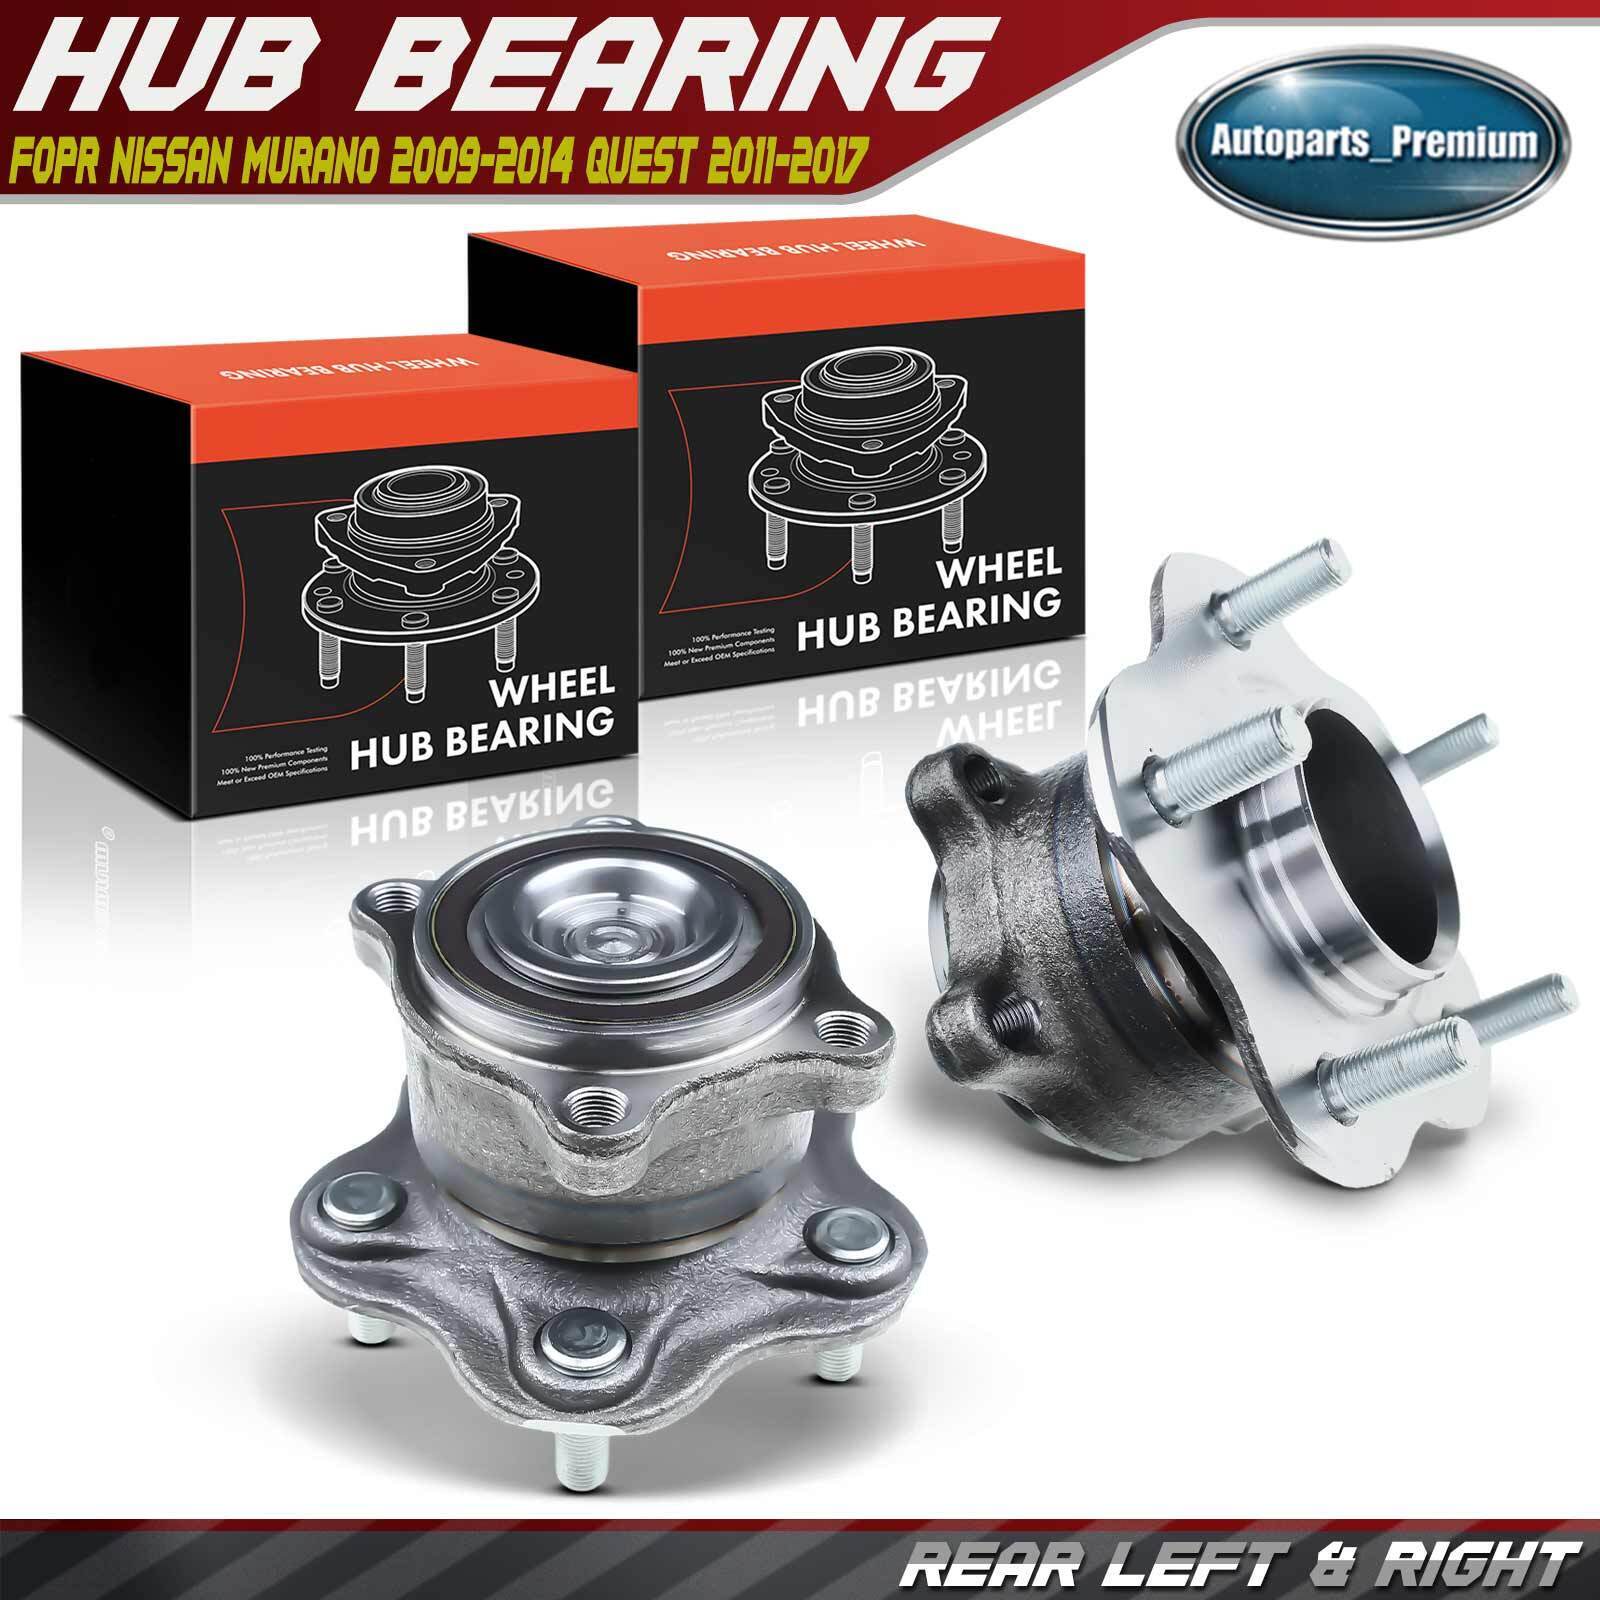 2x Rear LH & RH Wheel Hub Bearing Assembly for Nissan Murano 09-14 Quest 2011-17